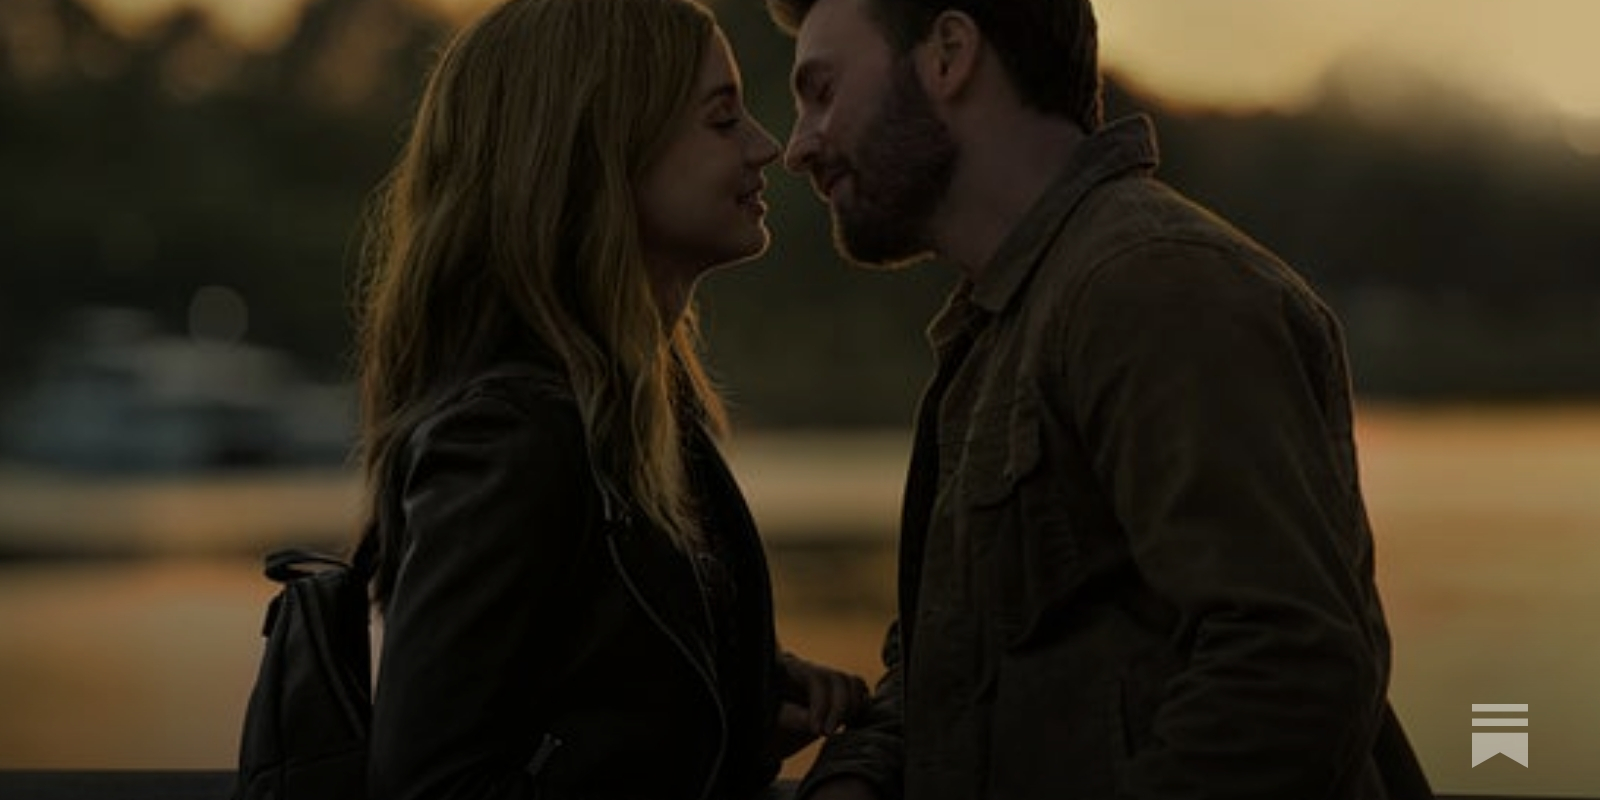 Chris Evans, Ana de Armas Dish on Friendship and Chemistry (Exclusive)